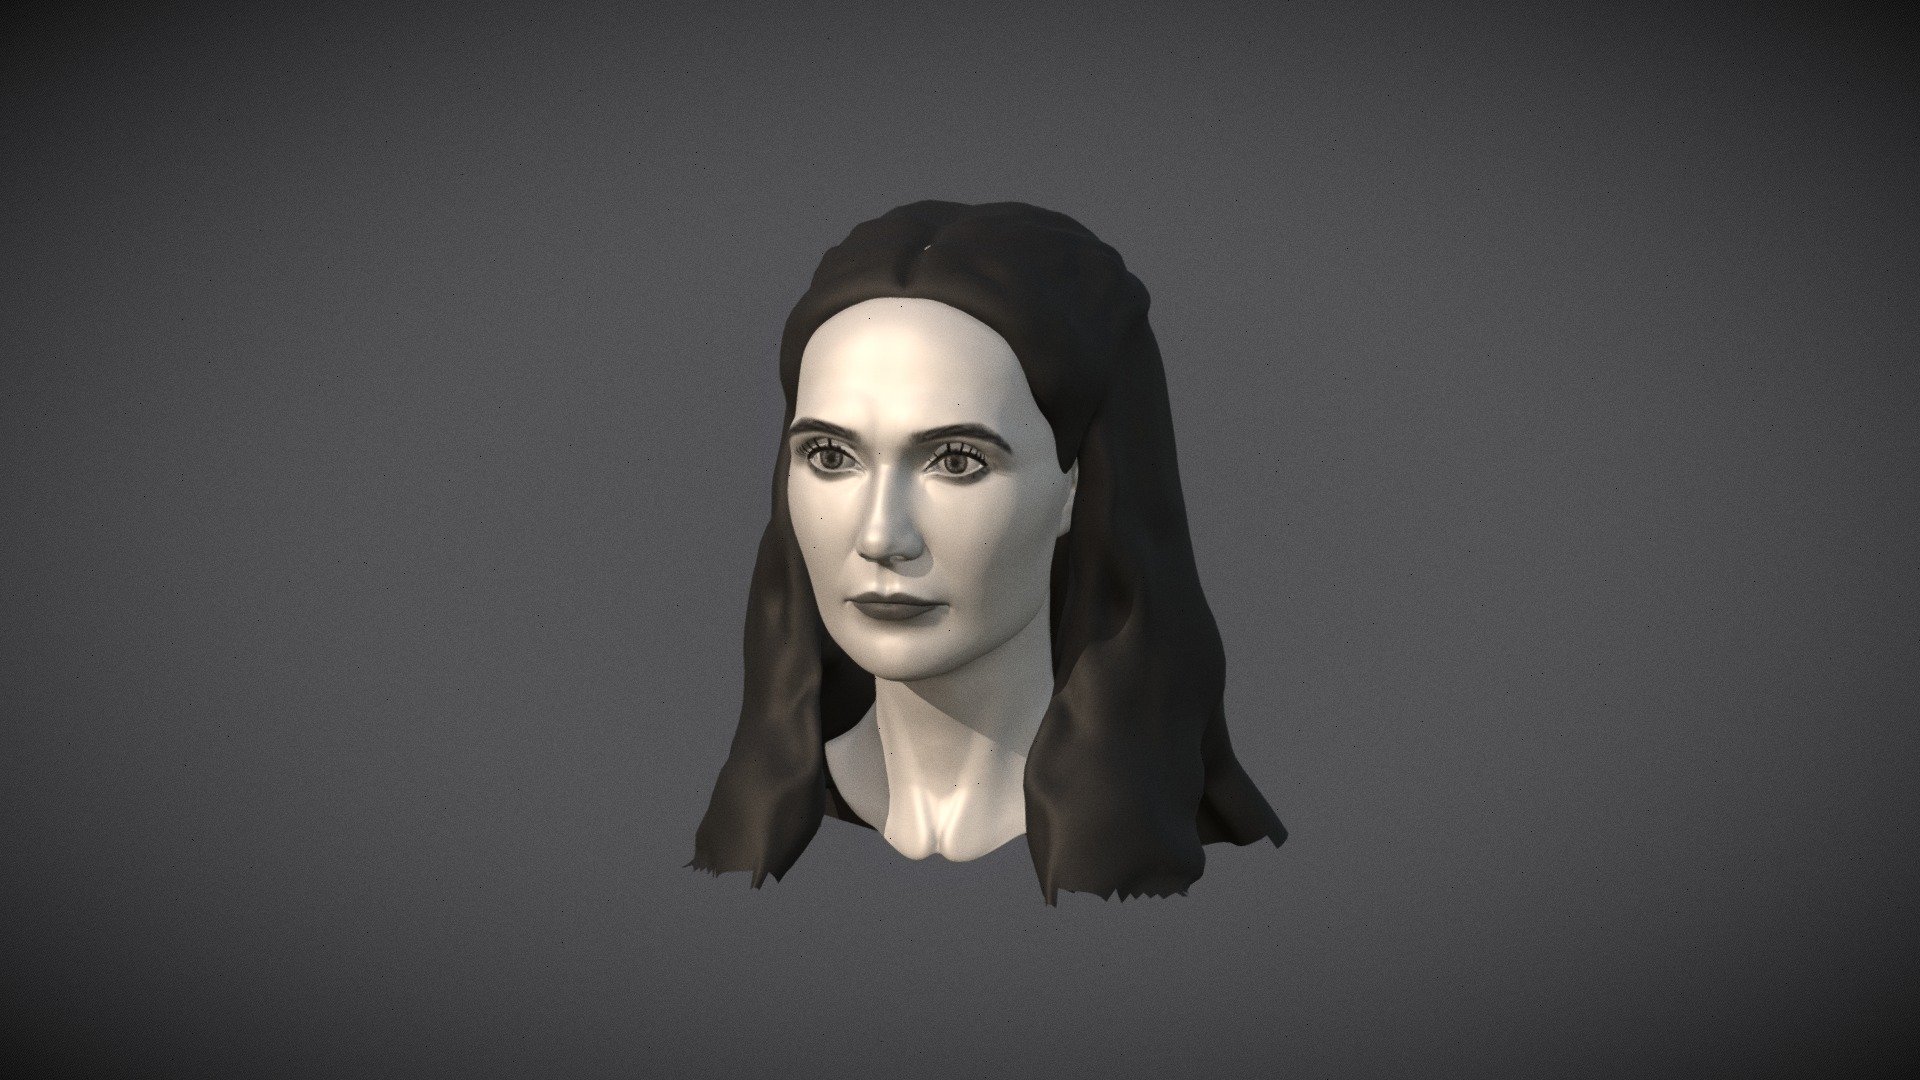 Character from Game of thrones. (Not finished)
Sculpted in Zbrush 3d model